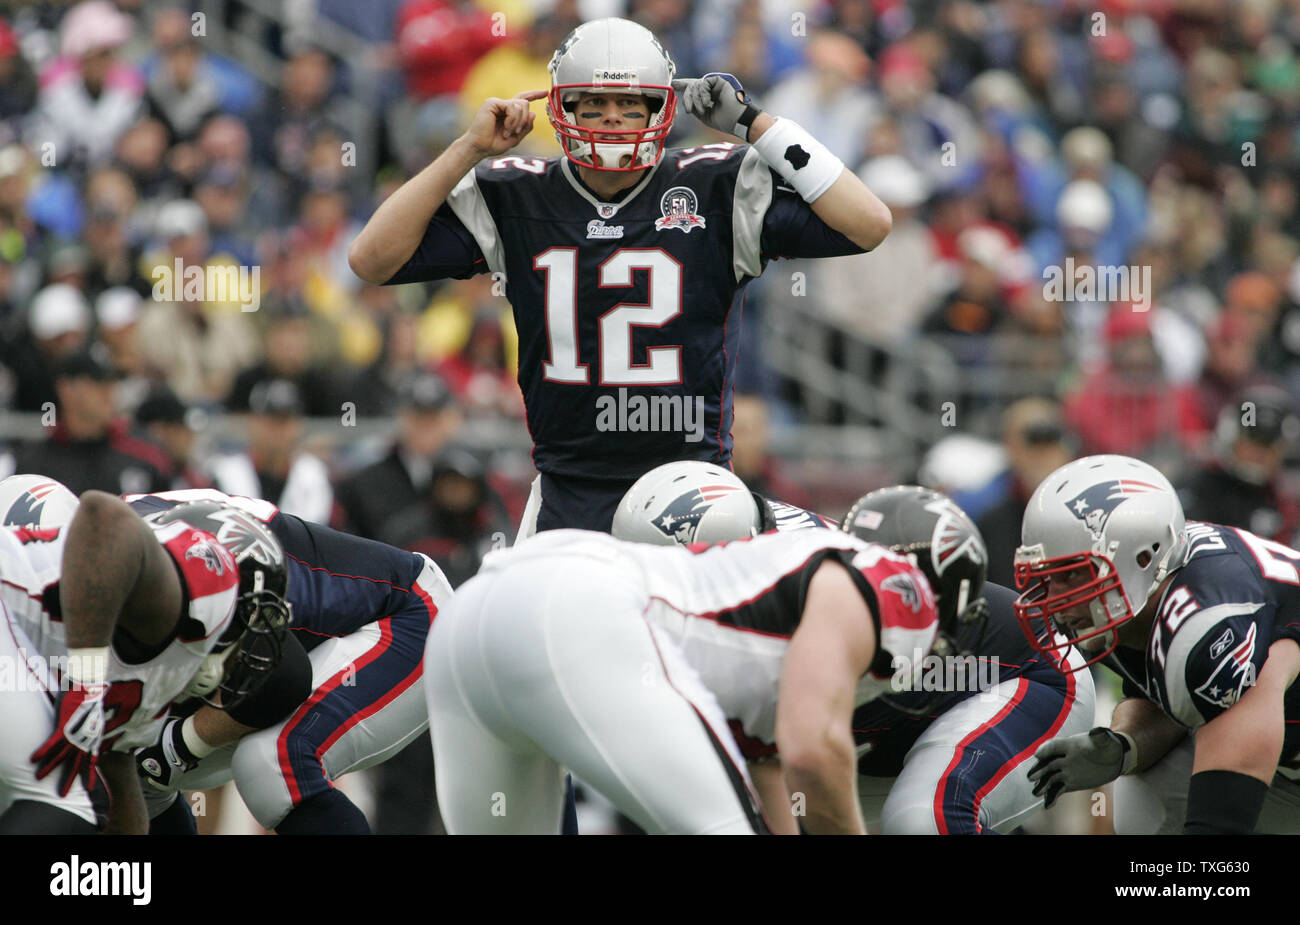 New England Patriots QB Tom Brady makes an audible call before a play against the Atlanta Falcons at Gillette Stadium in Foxboro, Massachusetts on September 27, 2009.  The Patriots defeated the Falcons 26-10. UPI/Matthew Healey Stock Photo